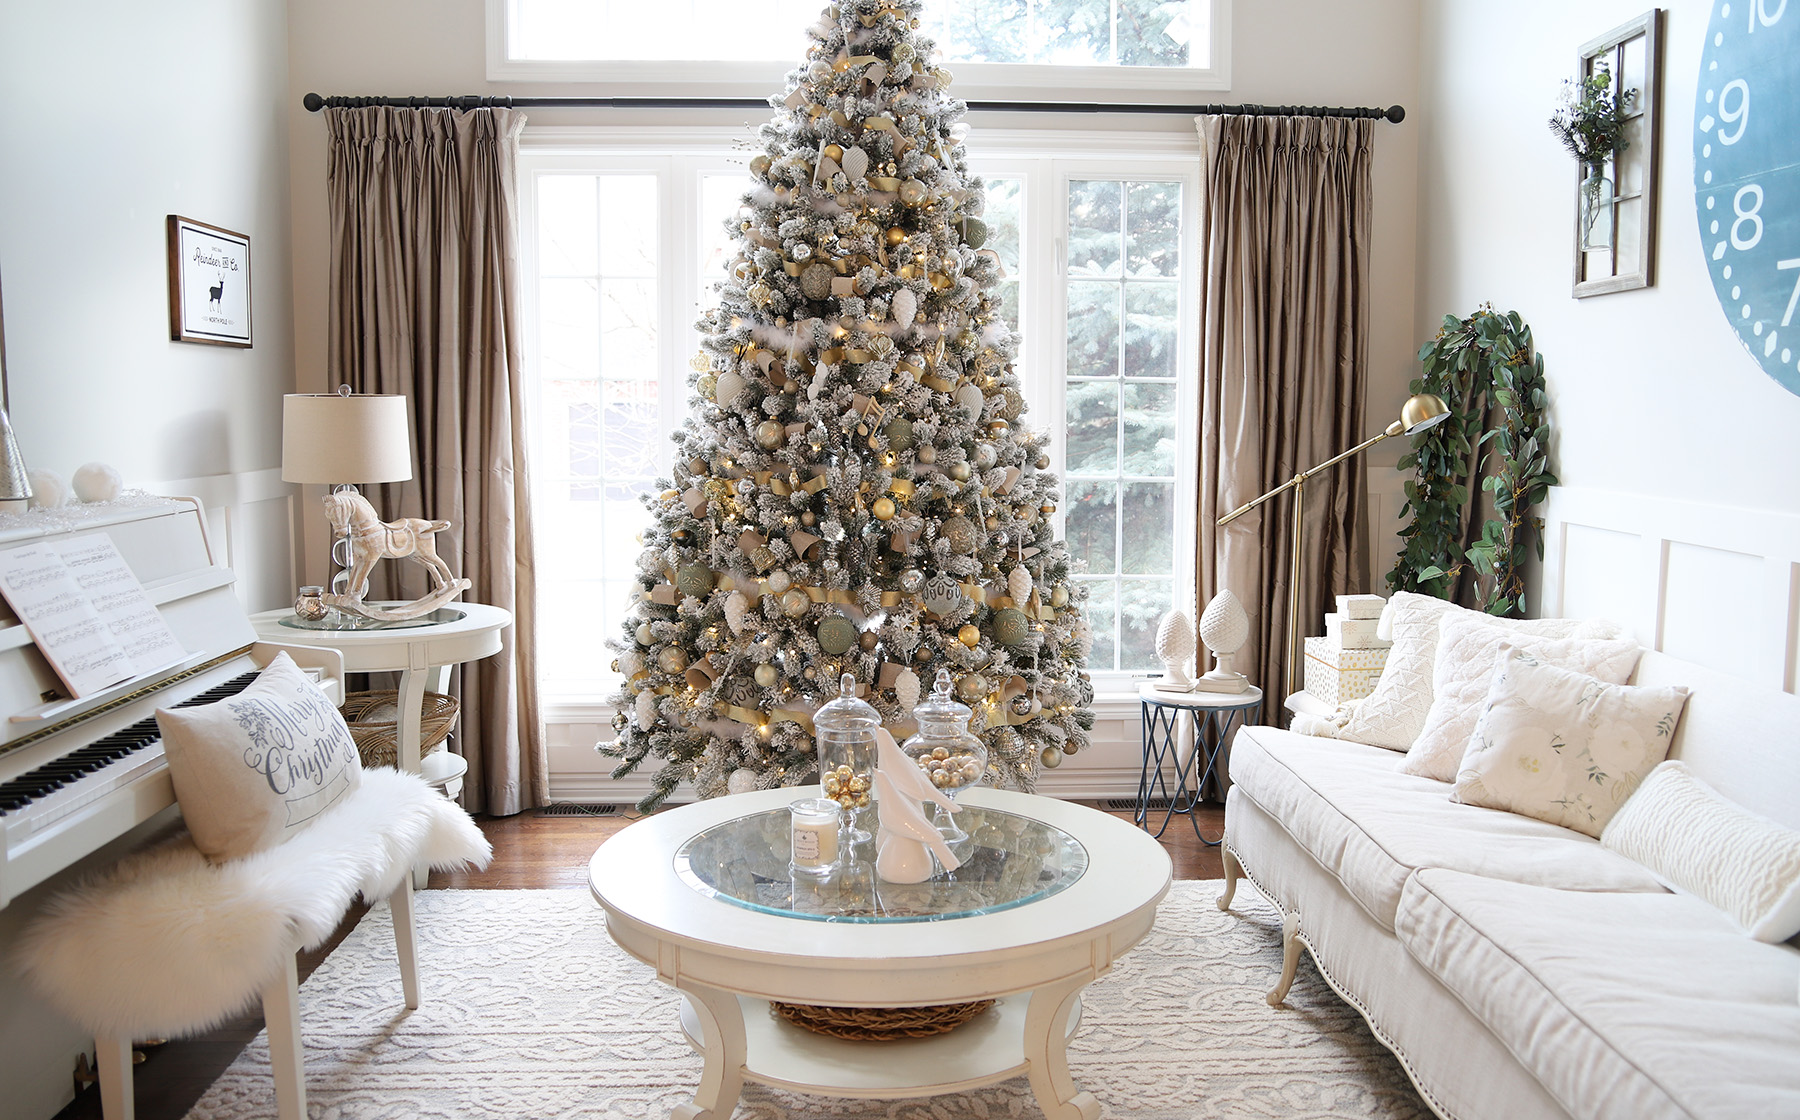 8 Unique Decorating Ideas For A Christmas Tree